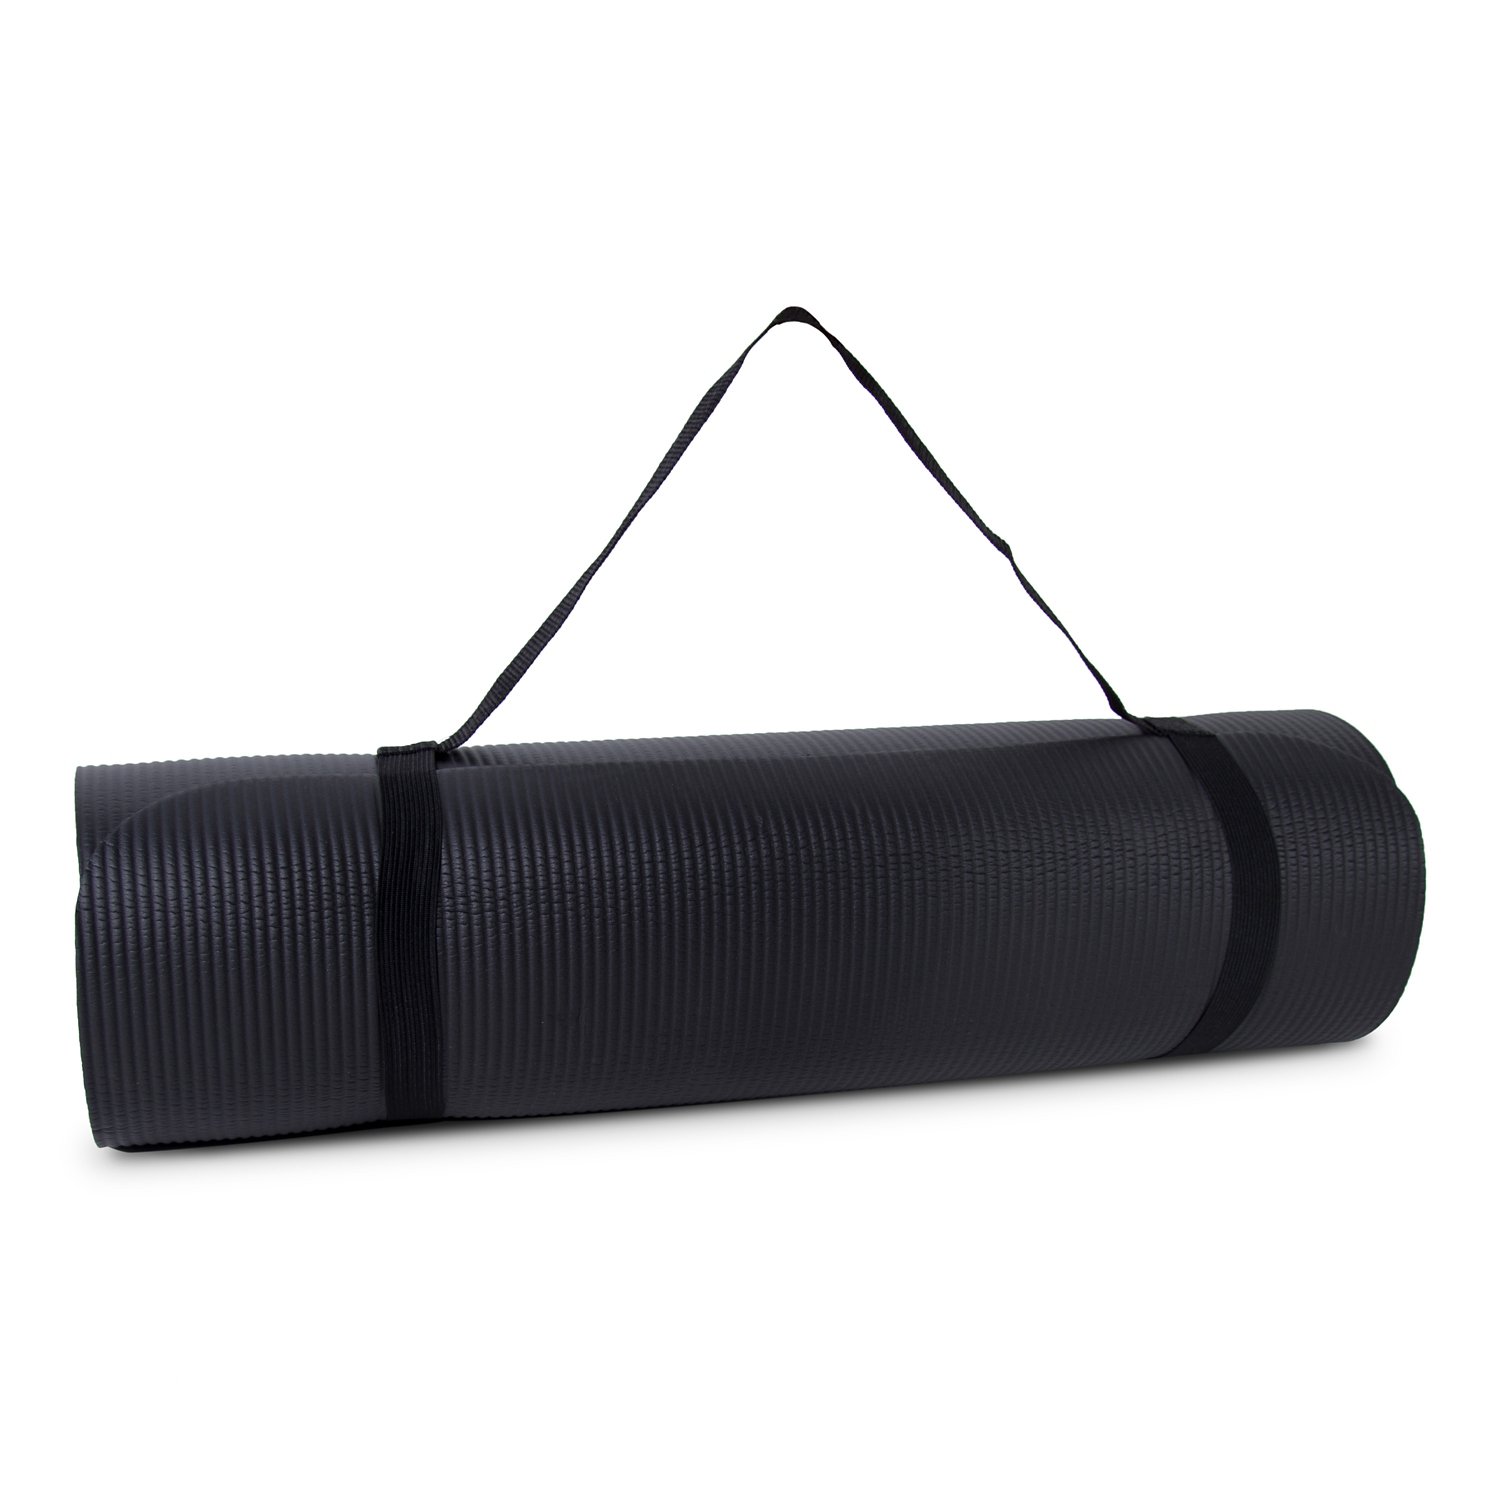 Tone Fitness High-Density Exercise Mat | Free Shipping at Academy